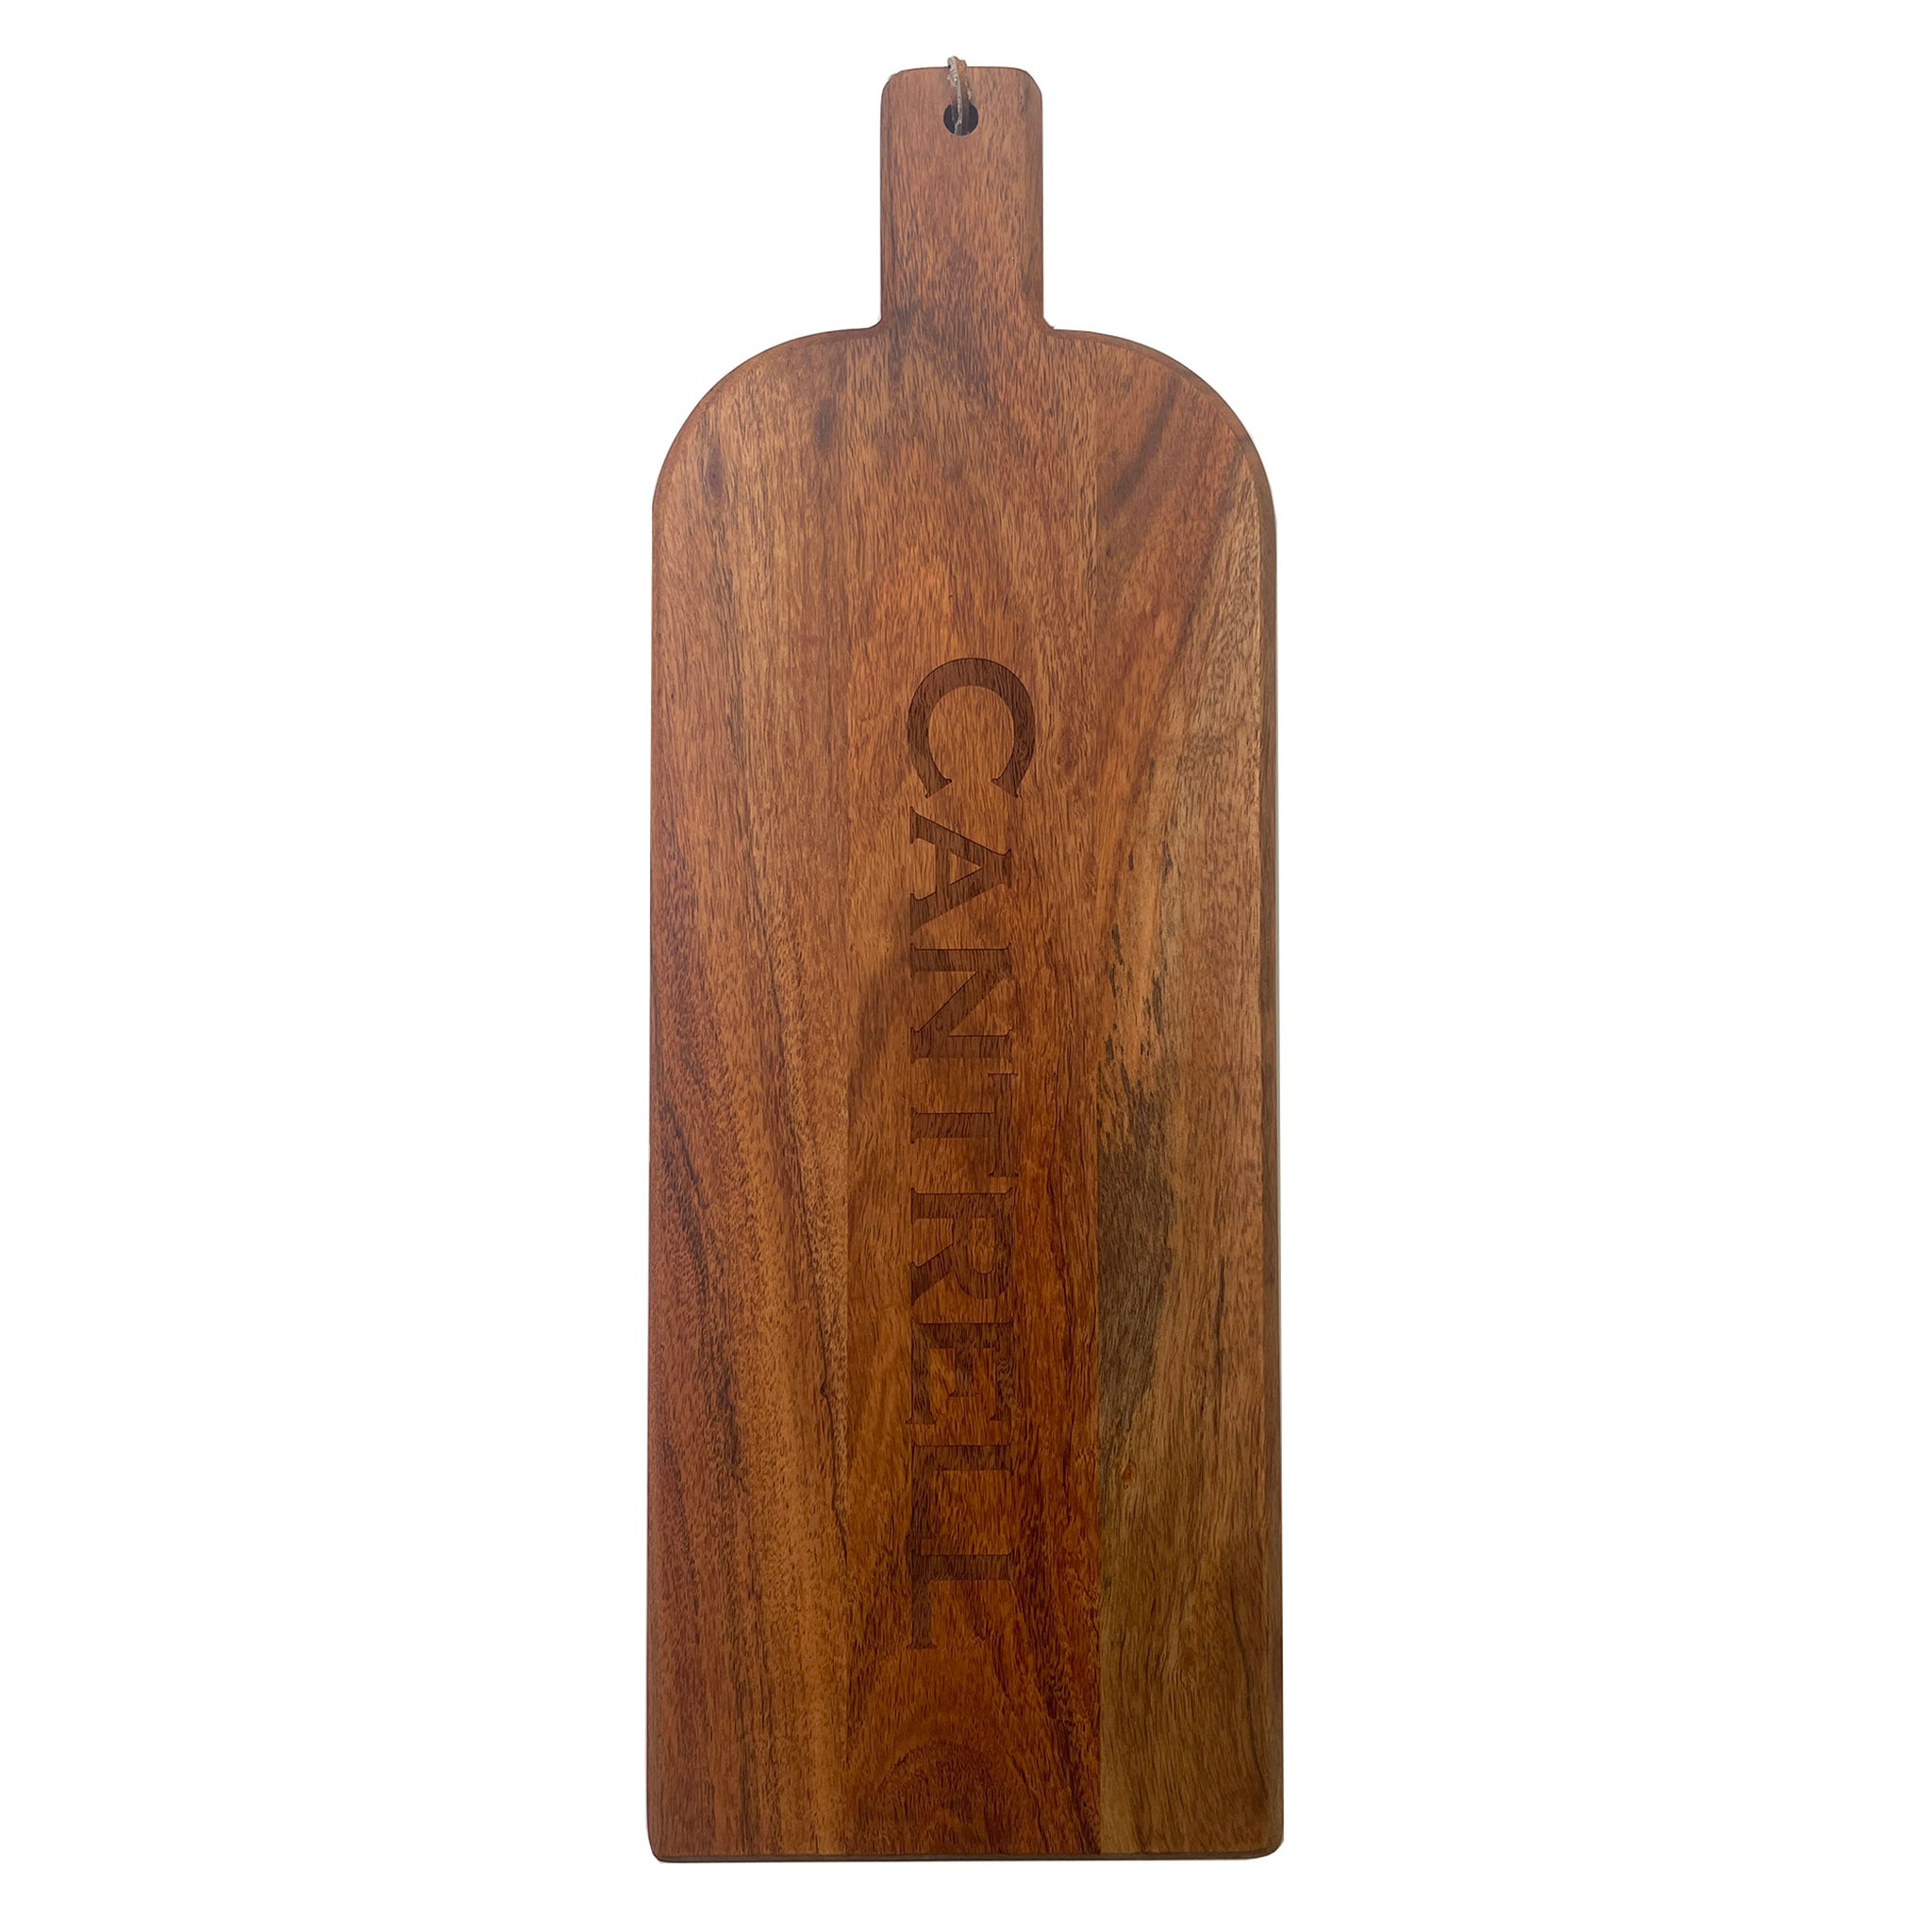 https://blueribbongeneralstore.com/cdn/shop/files/sophistiplate-maple-leaf-20x7-acacia-wood-bevel-long-serving-board-with-handle-front-view-with-last-name.jpg?v=1693599465